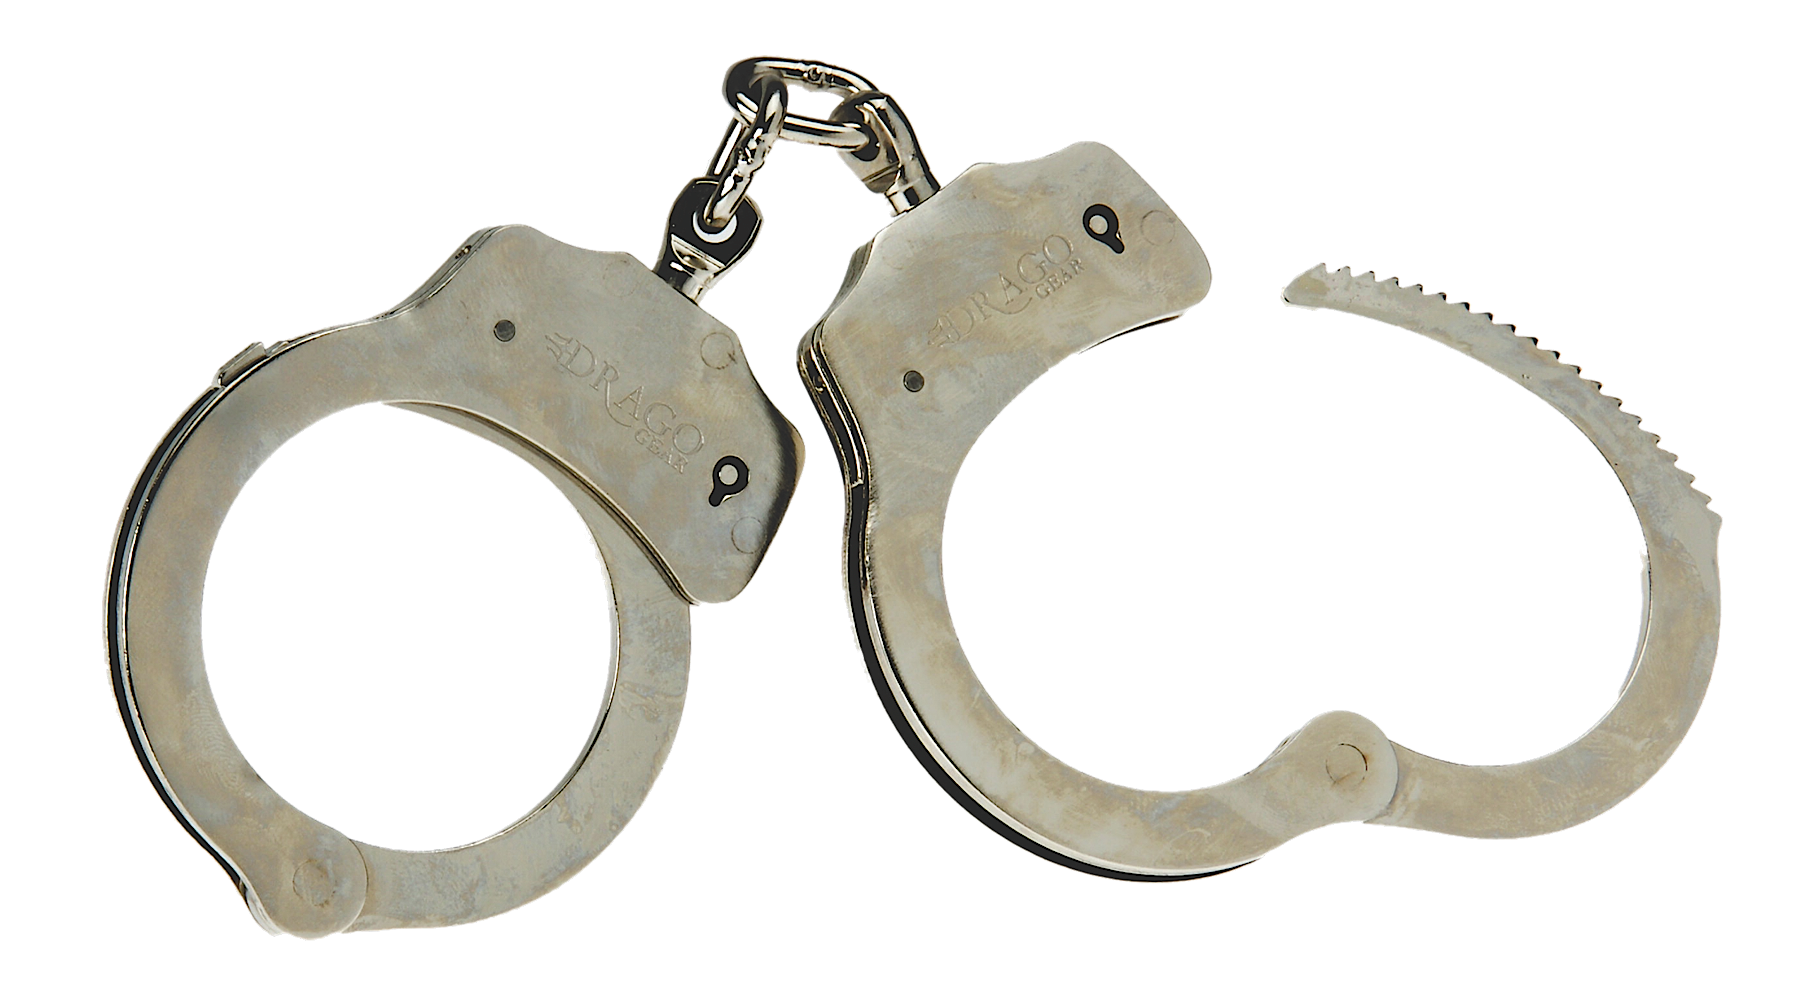 Handcuff clipart transparent background. Handcuffs png images free